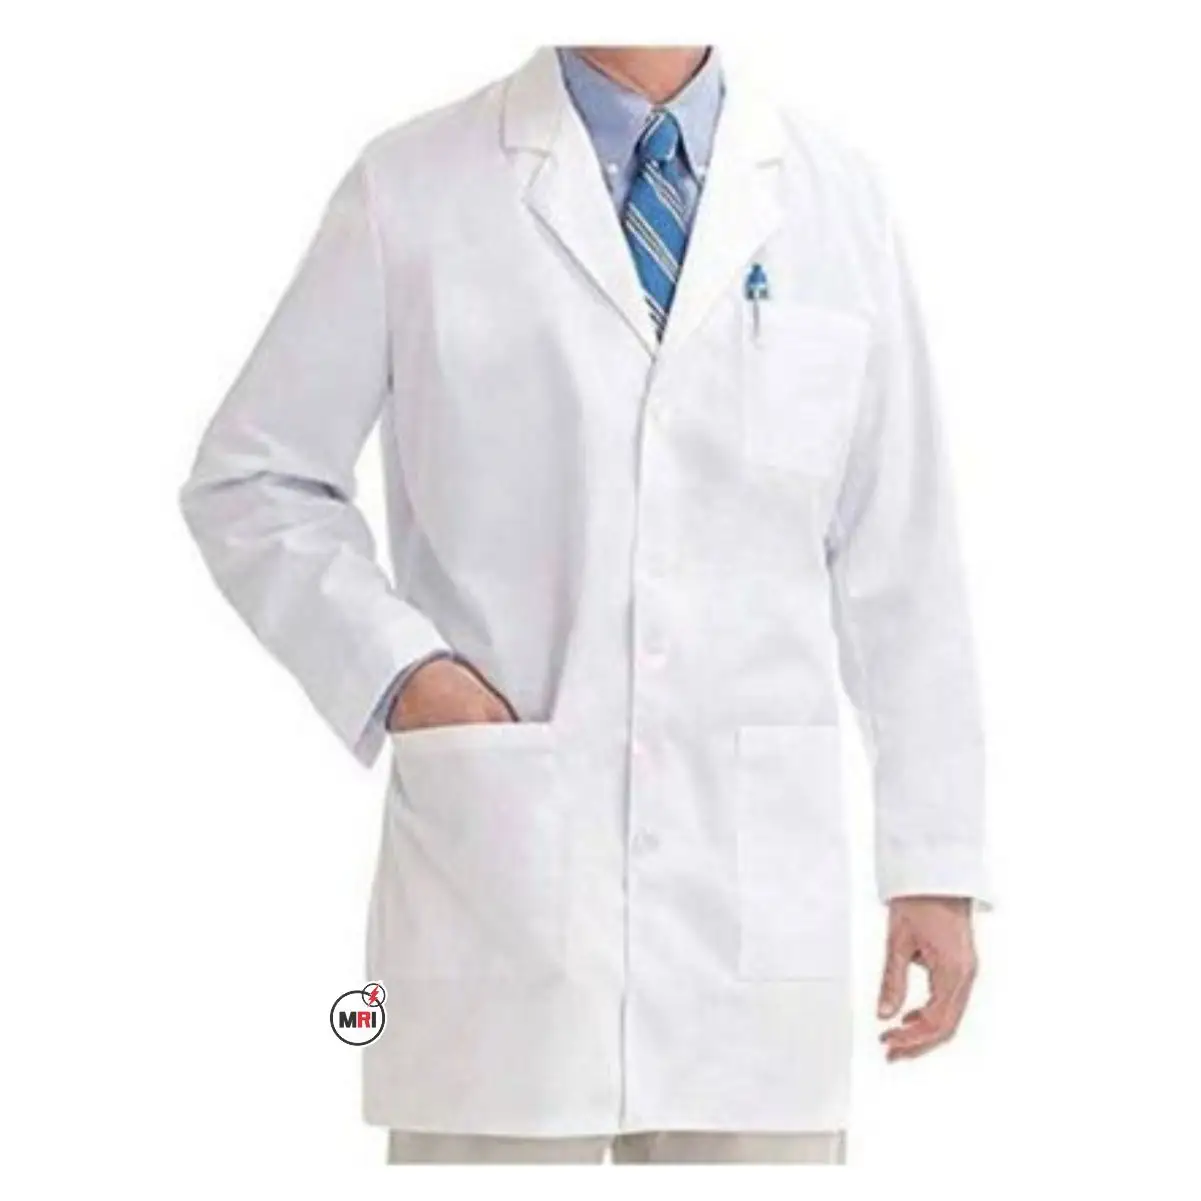 Wholesale laboratory coats Food Factory Worker Uniforms Lab Coat with Pockets customized LOGO doctor suit